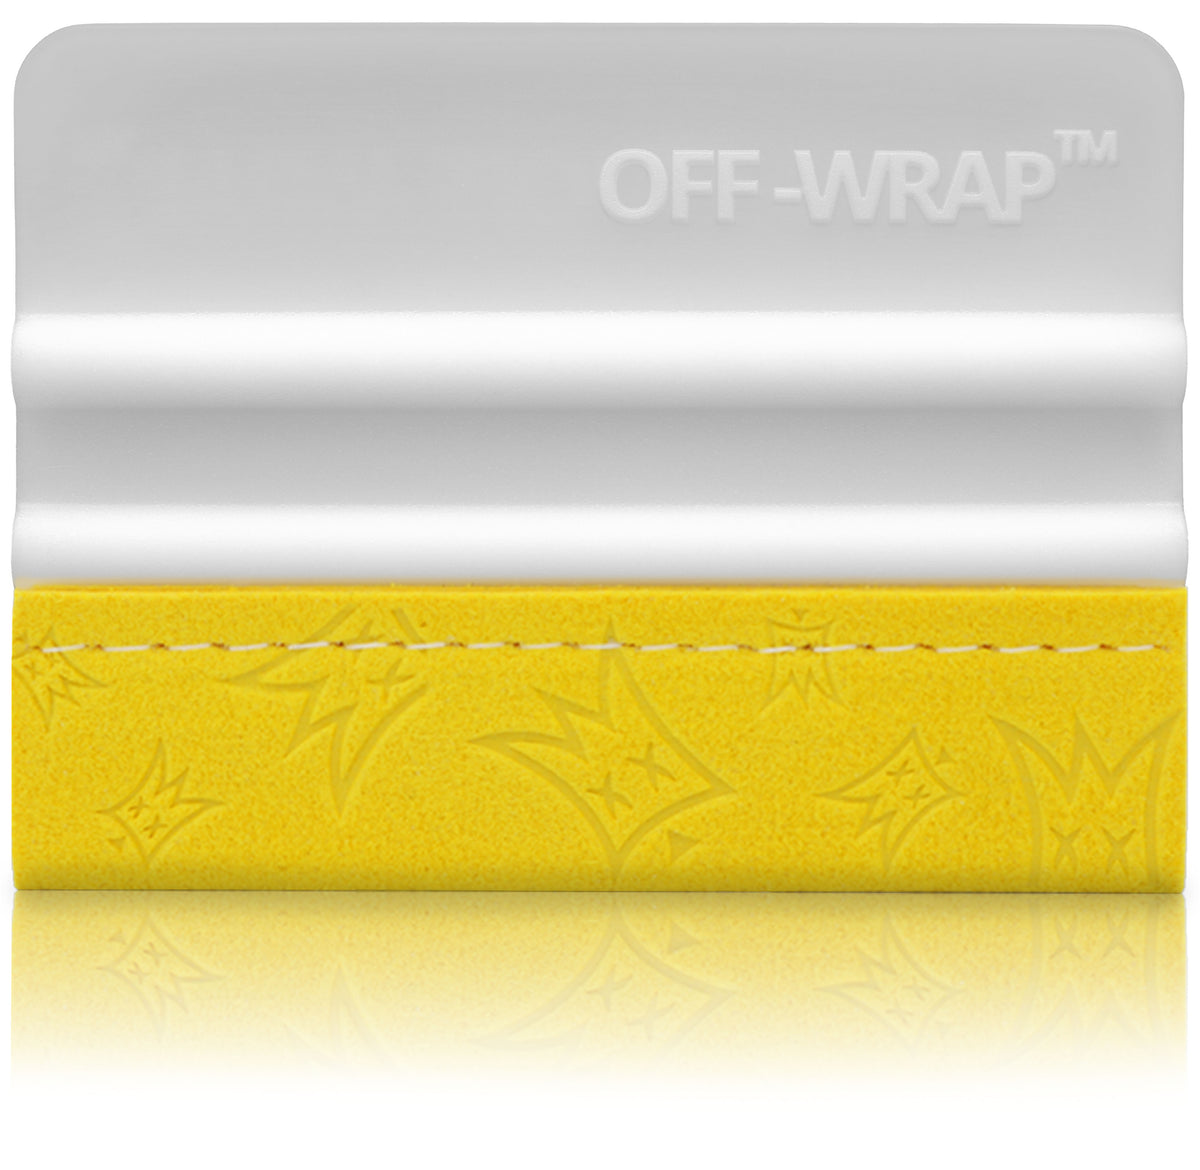 Off Wrap Firm Yellow Squeegee